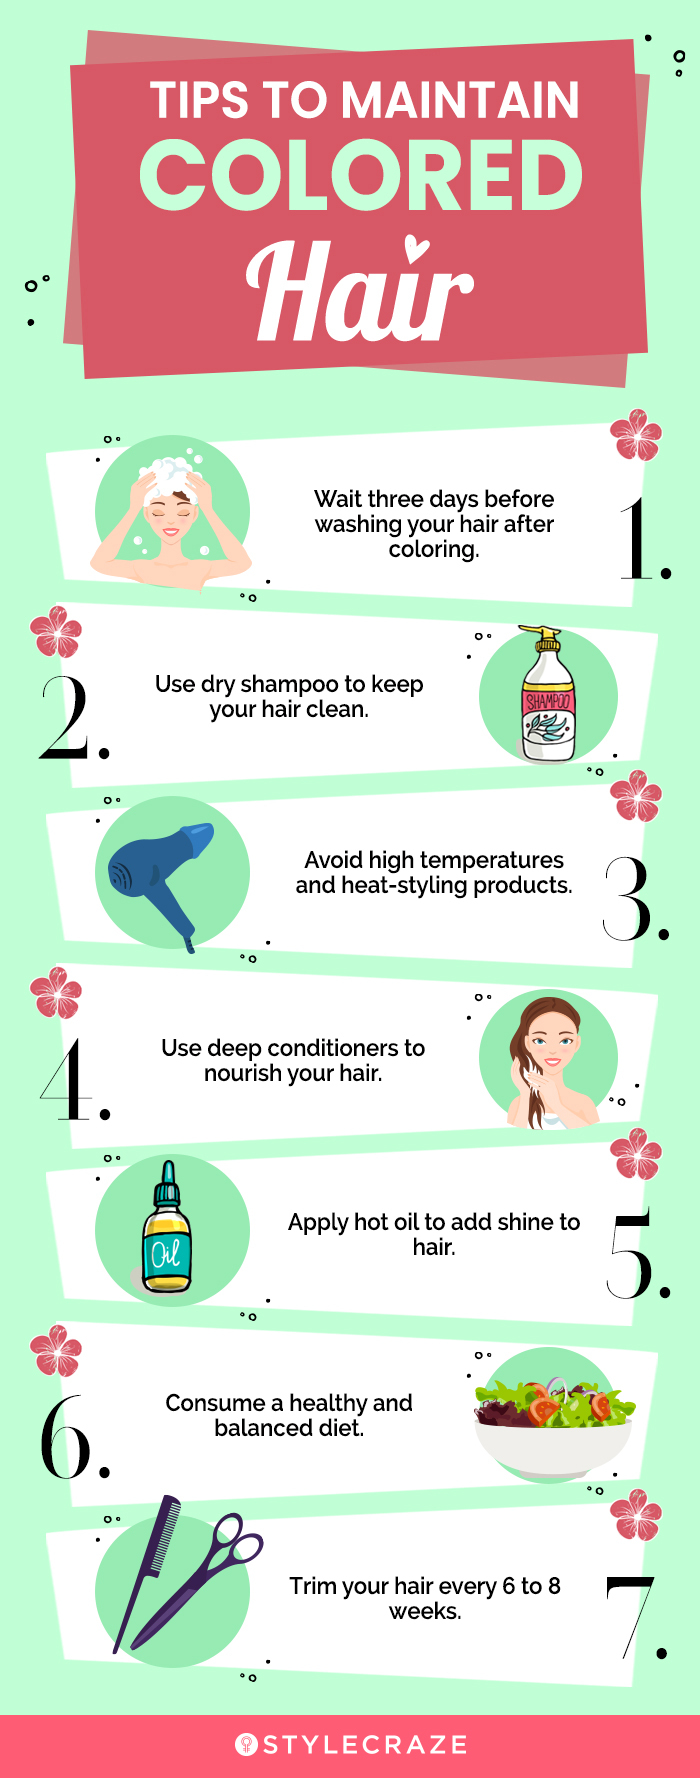 tips to maintain colored hair [infographic]